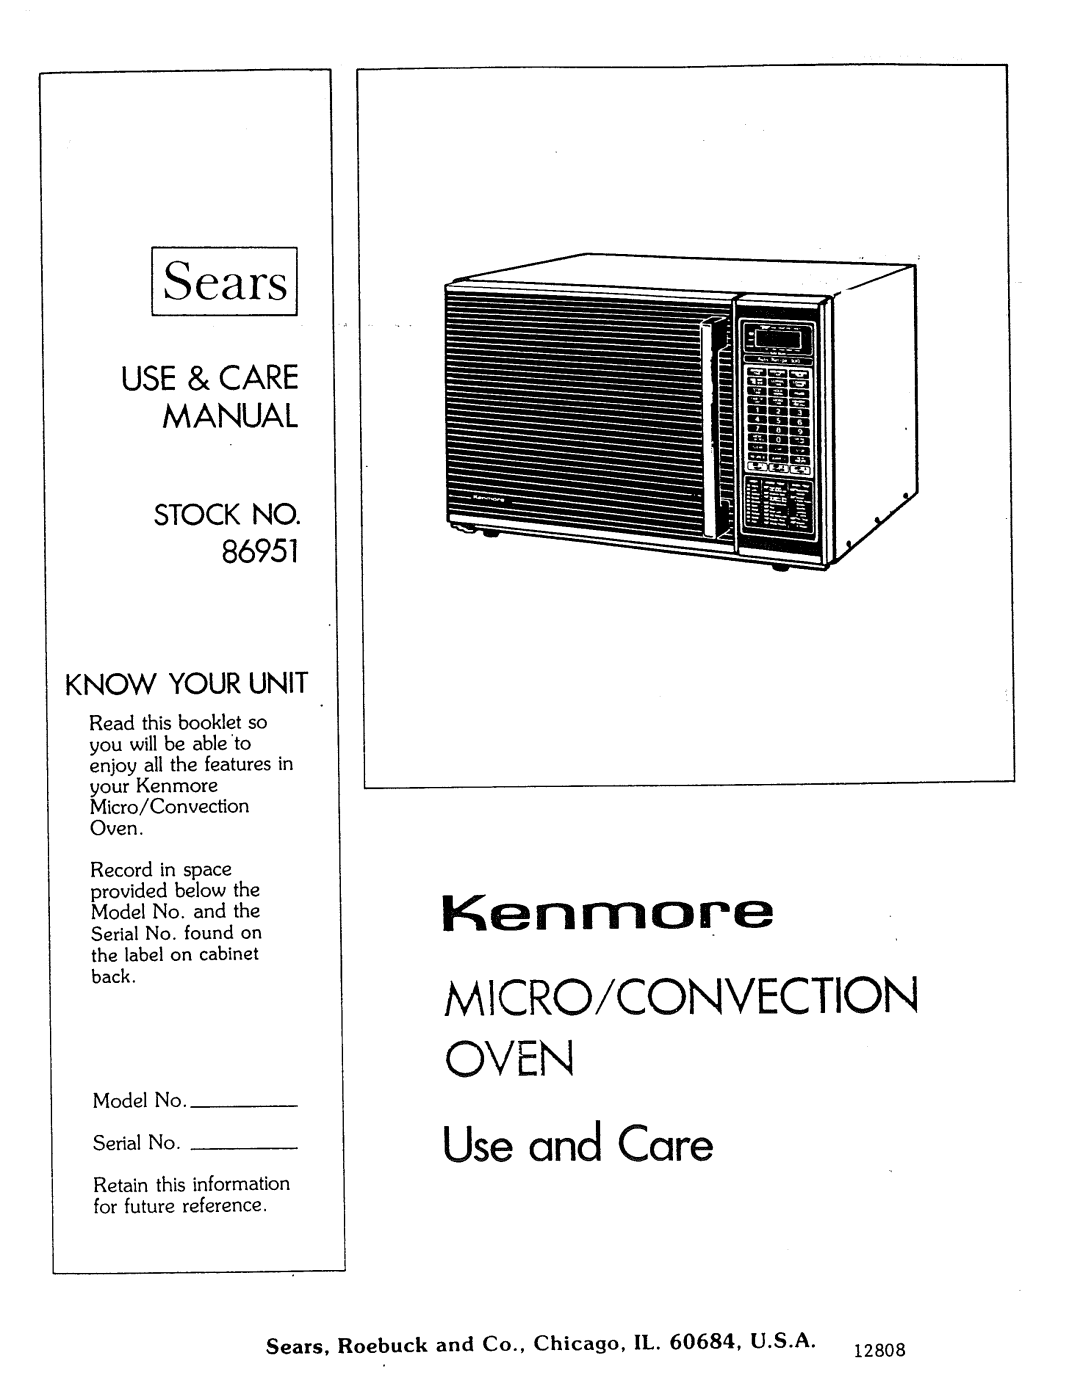 Kenmore Microwave Oven manual MICRO/C O NVECTION OVEN Use and Care, Use& Care Manual, 86951, Stock No, Know Your Unit 